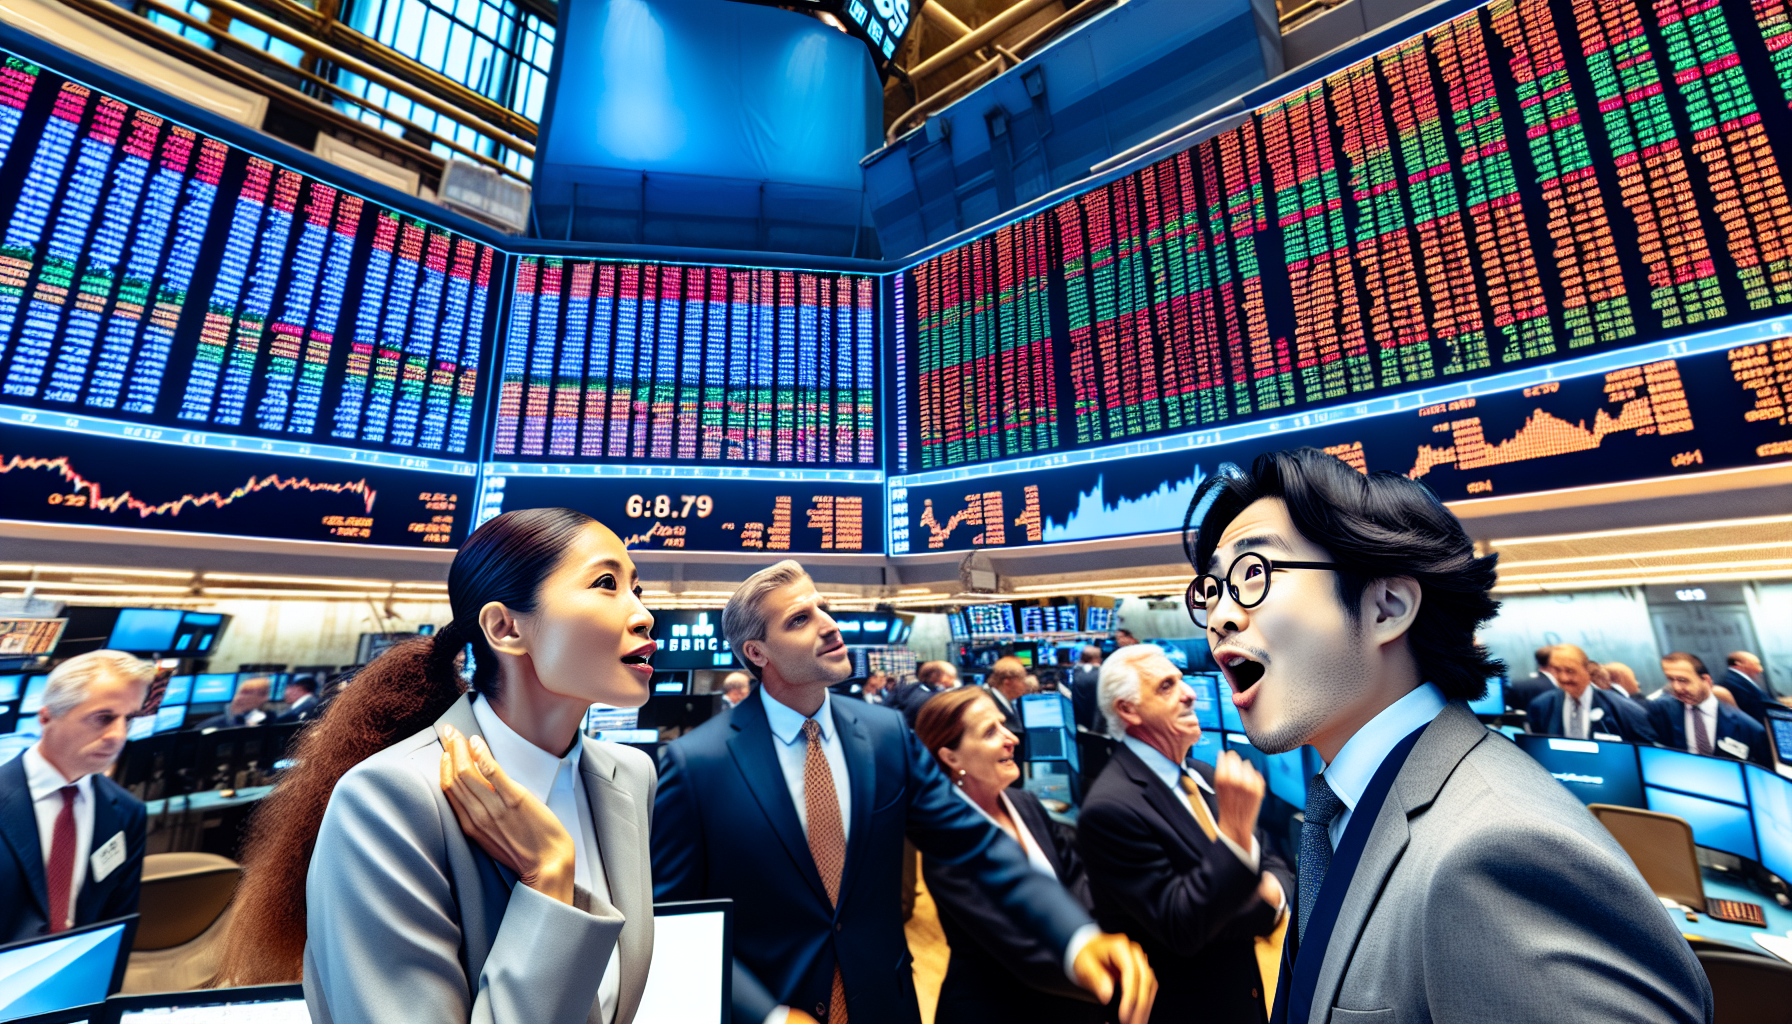 ETF trading on a stock exchange